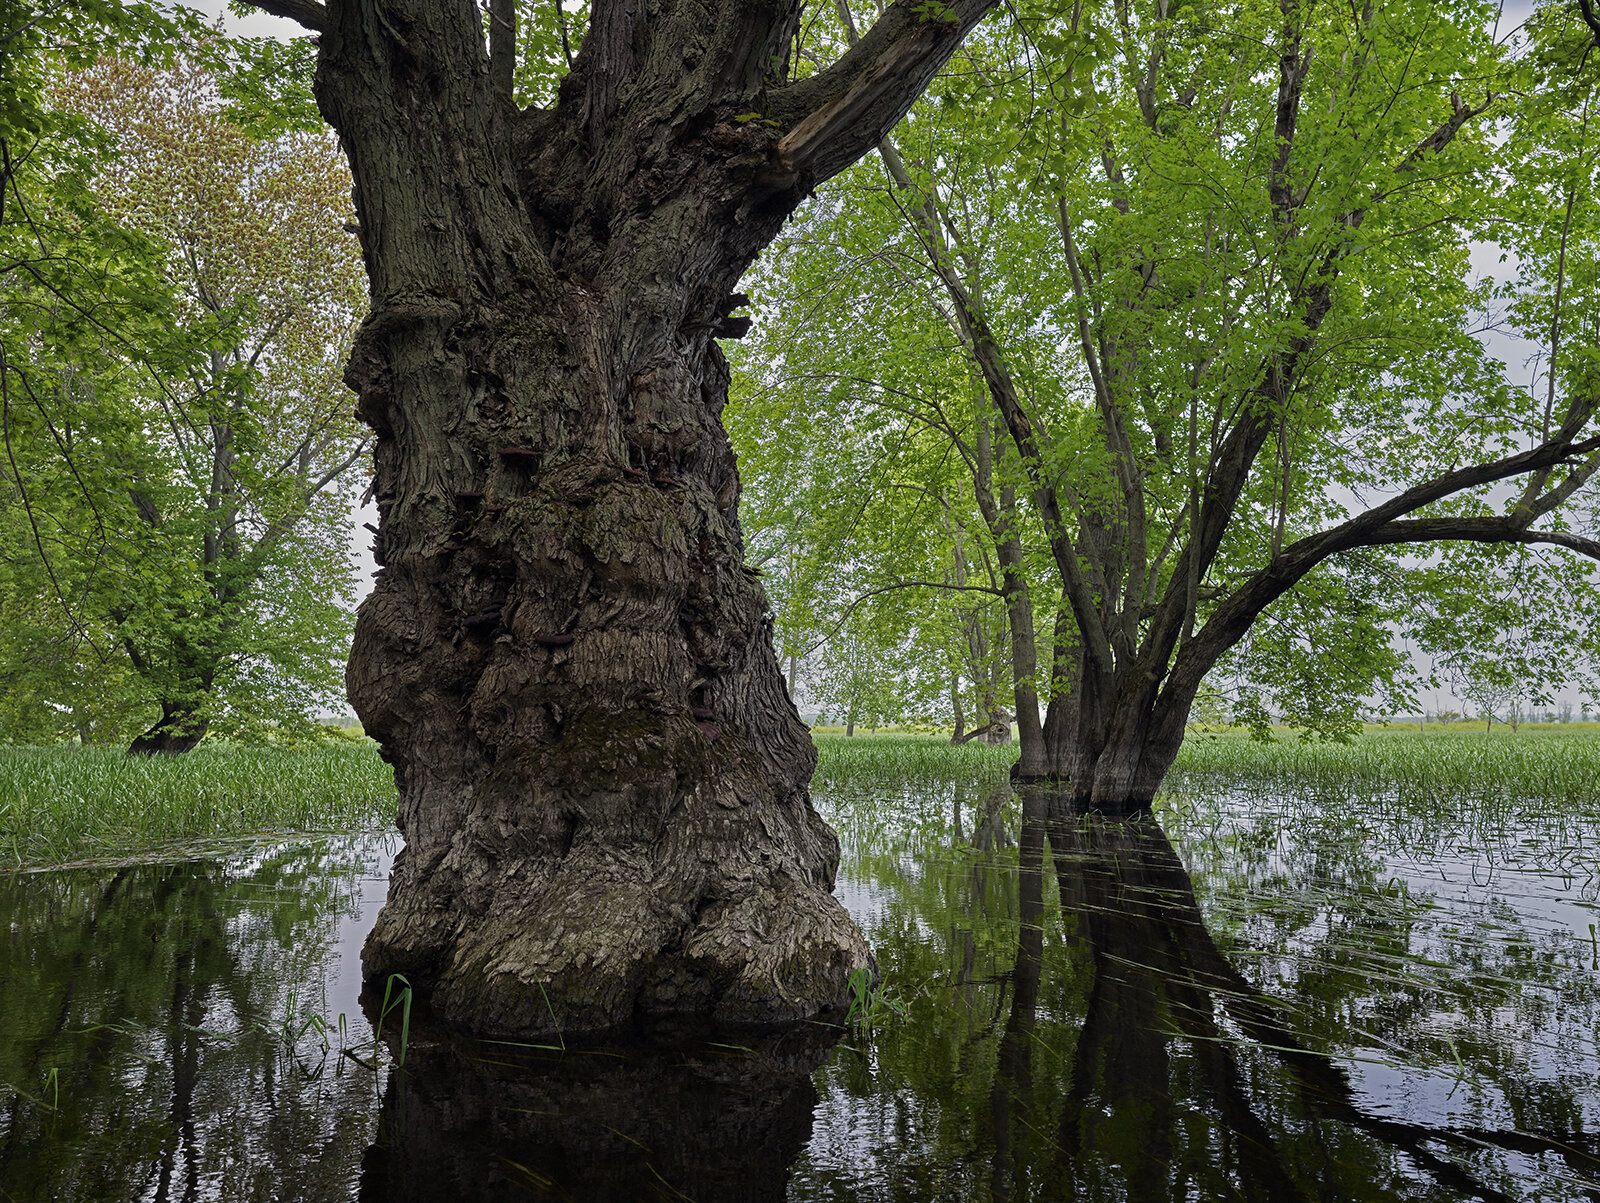 Lord of the Rings Tree, Silver Maple Grove, Minesing Wetlands (2019)